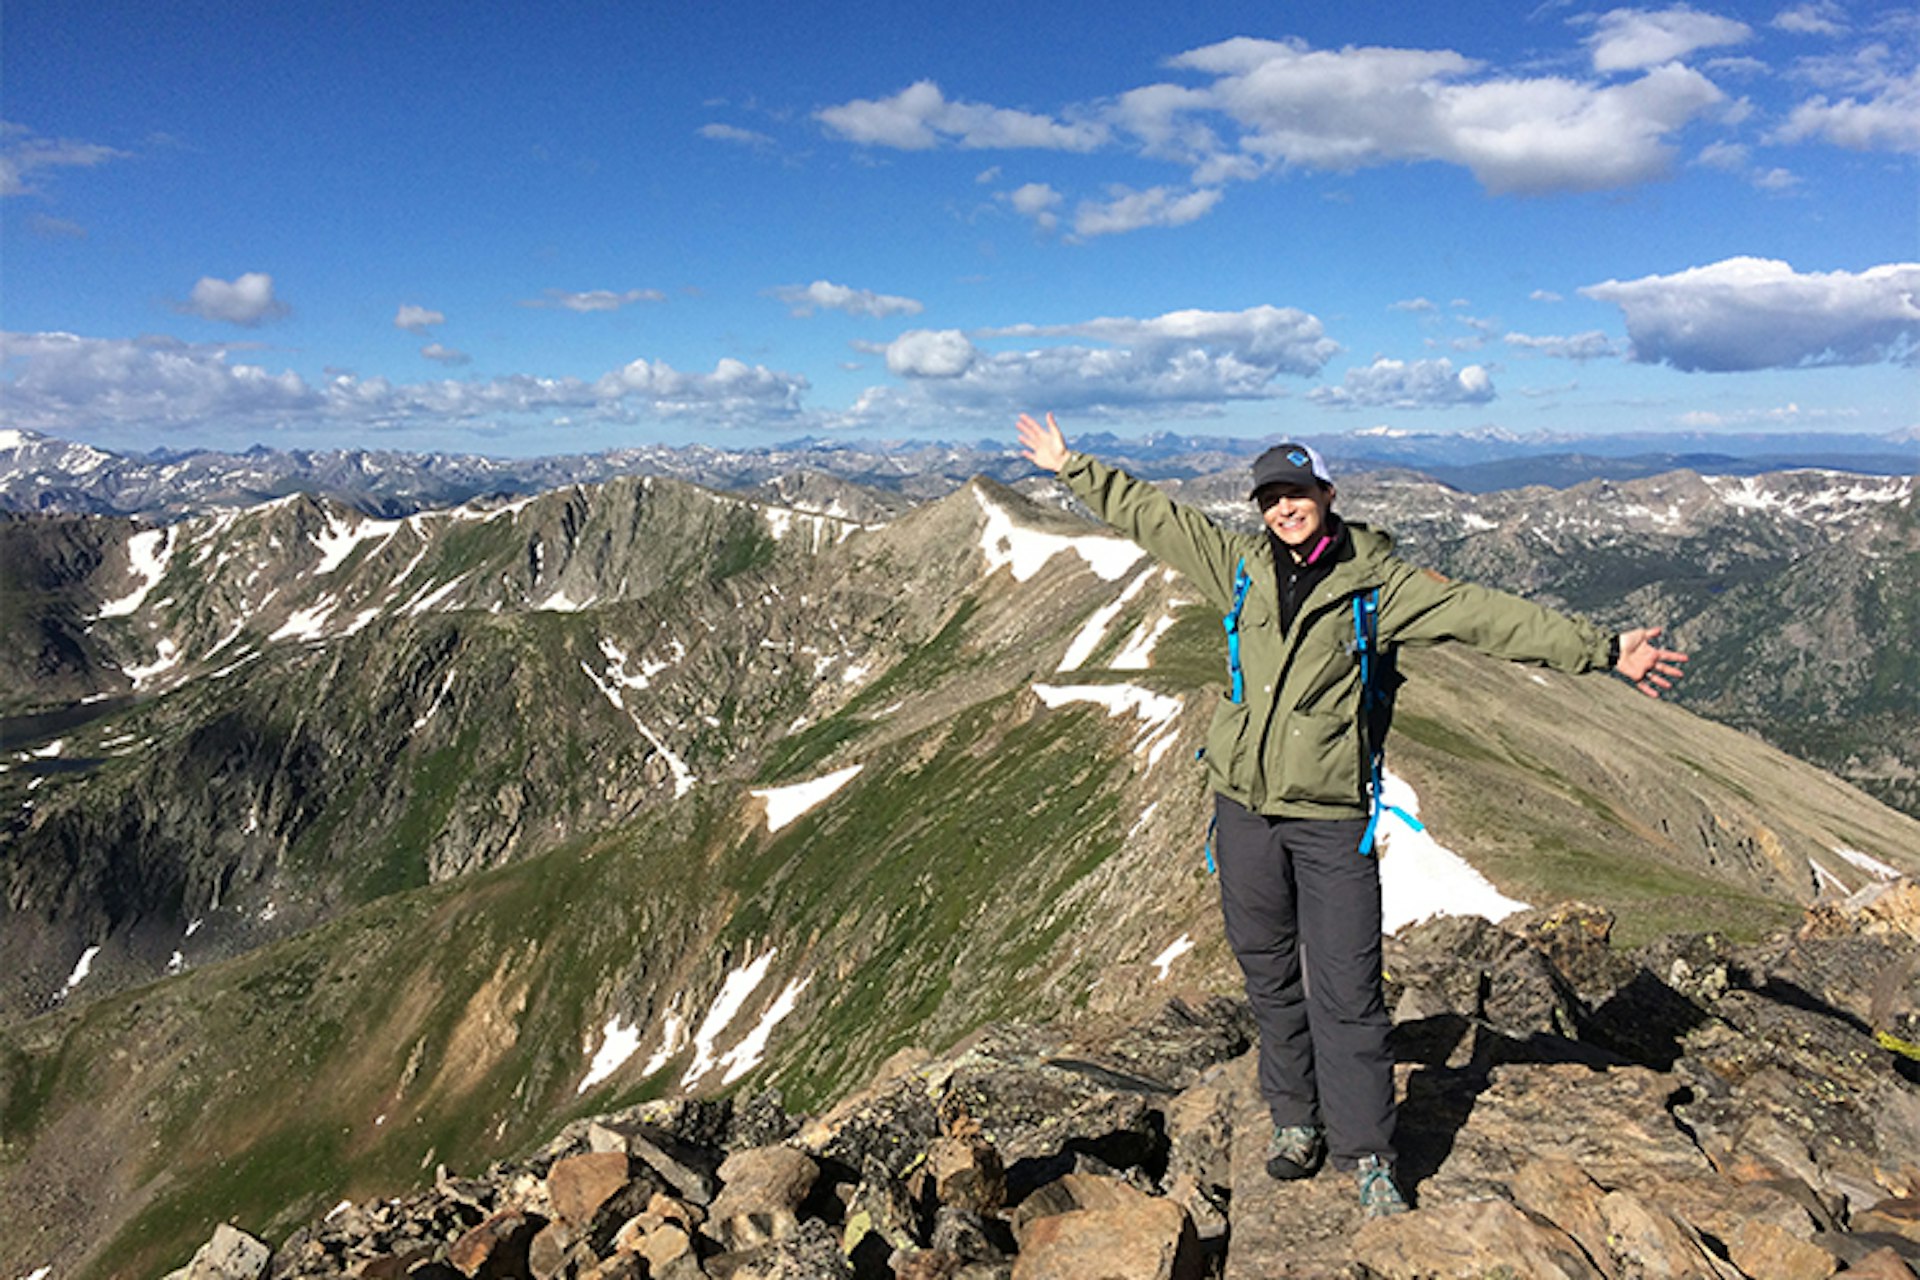 The author celebrating on the summit of Homestake Peak in the Colorado Rockies